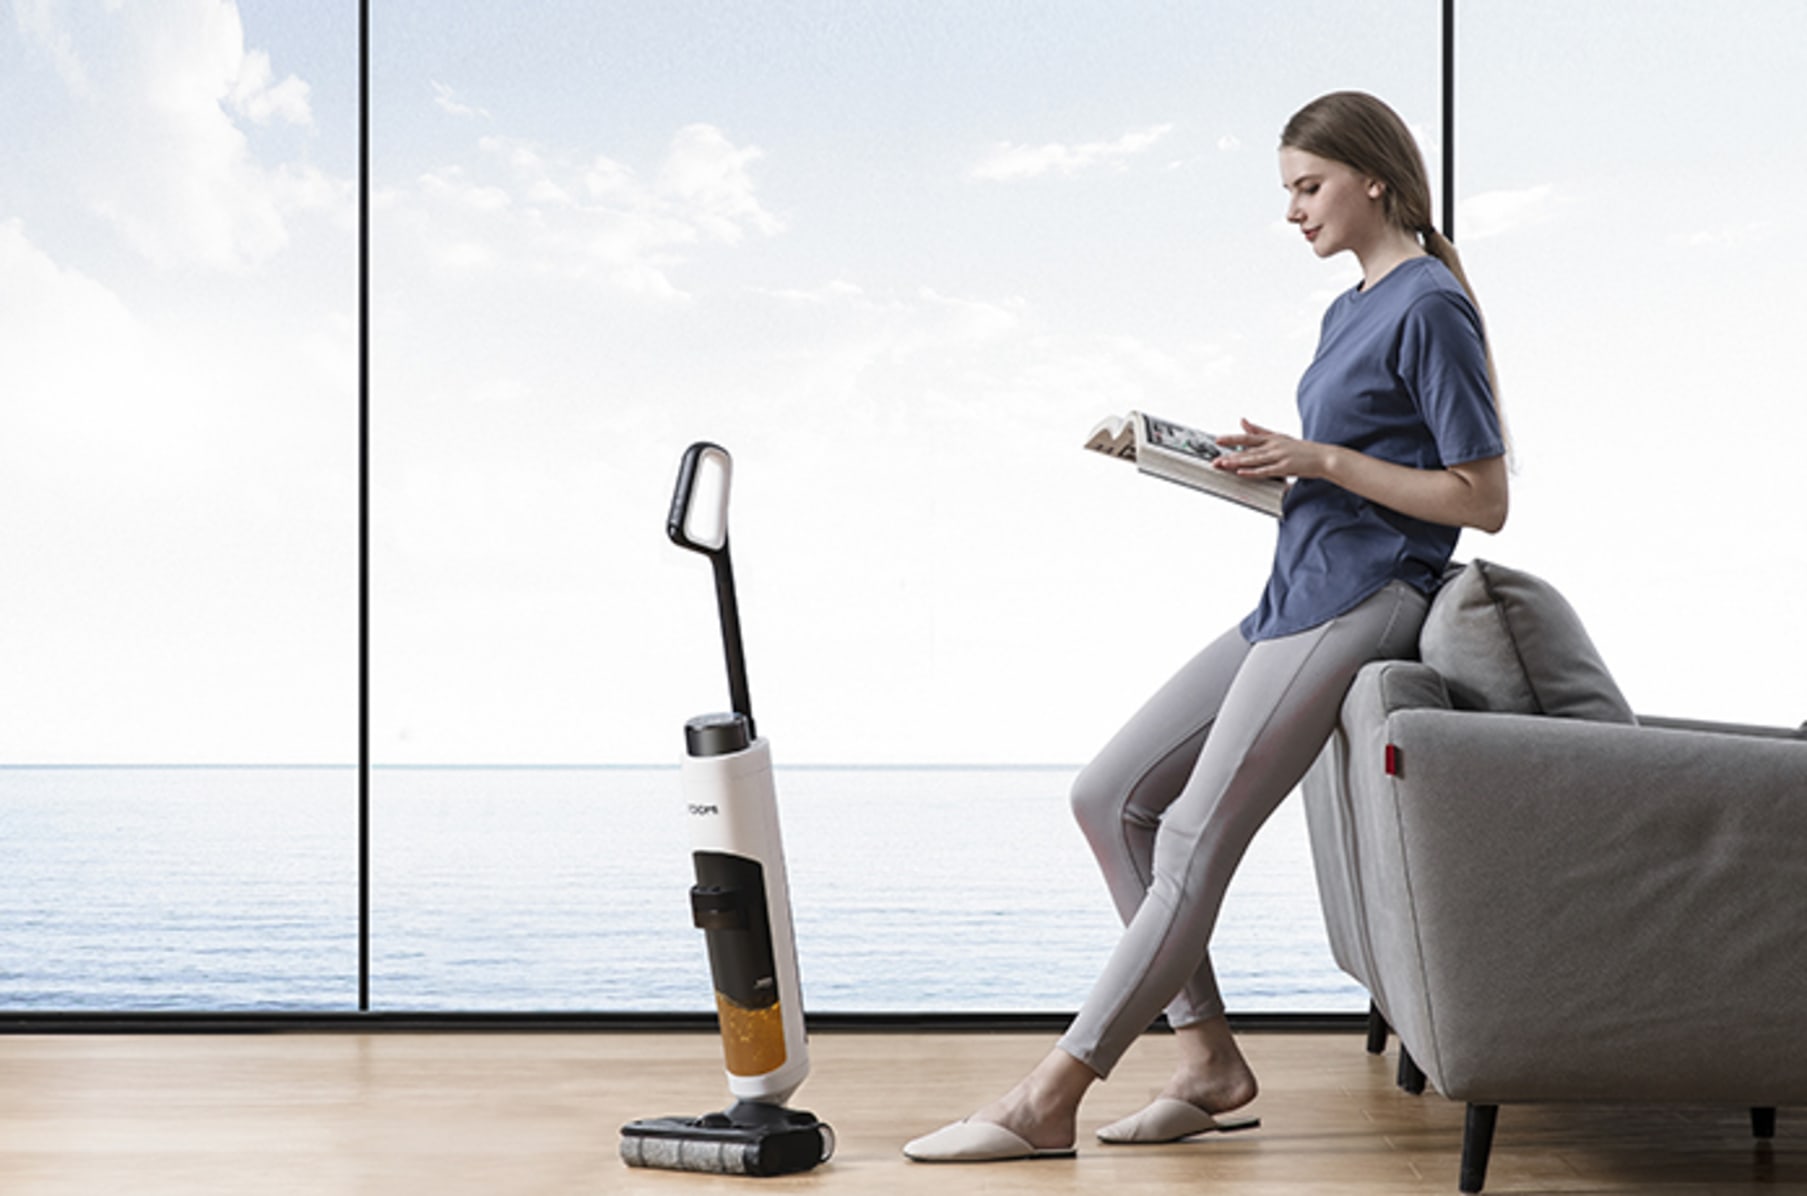 Review: This All-in-One Wet Dry Vacuum (Almost) Makes Cleaning Fun